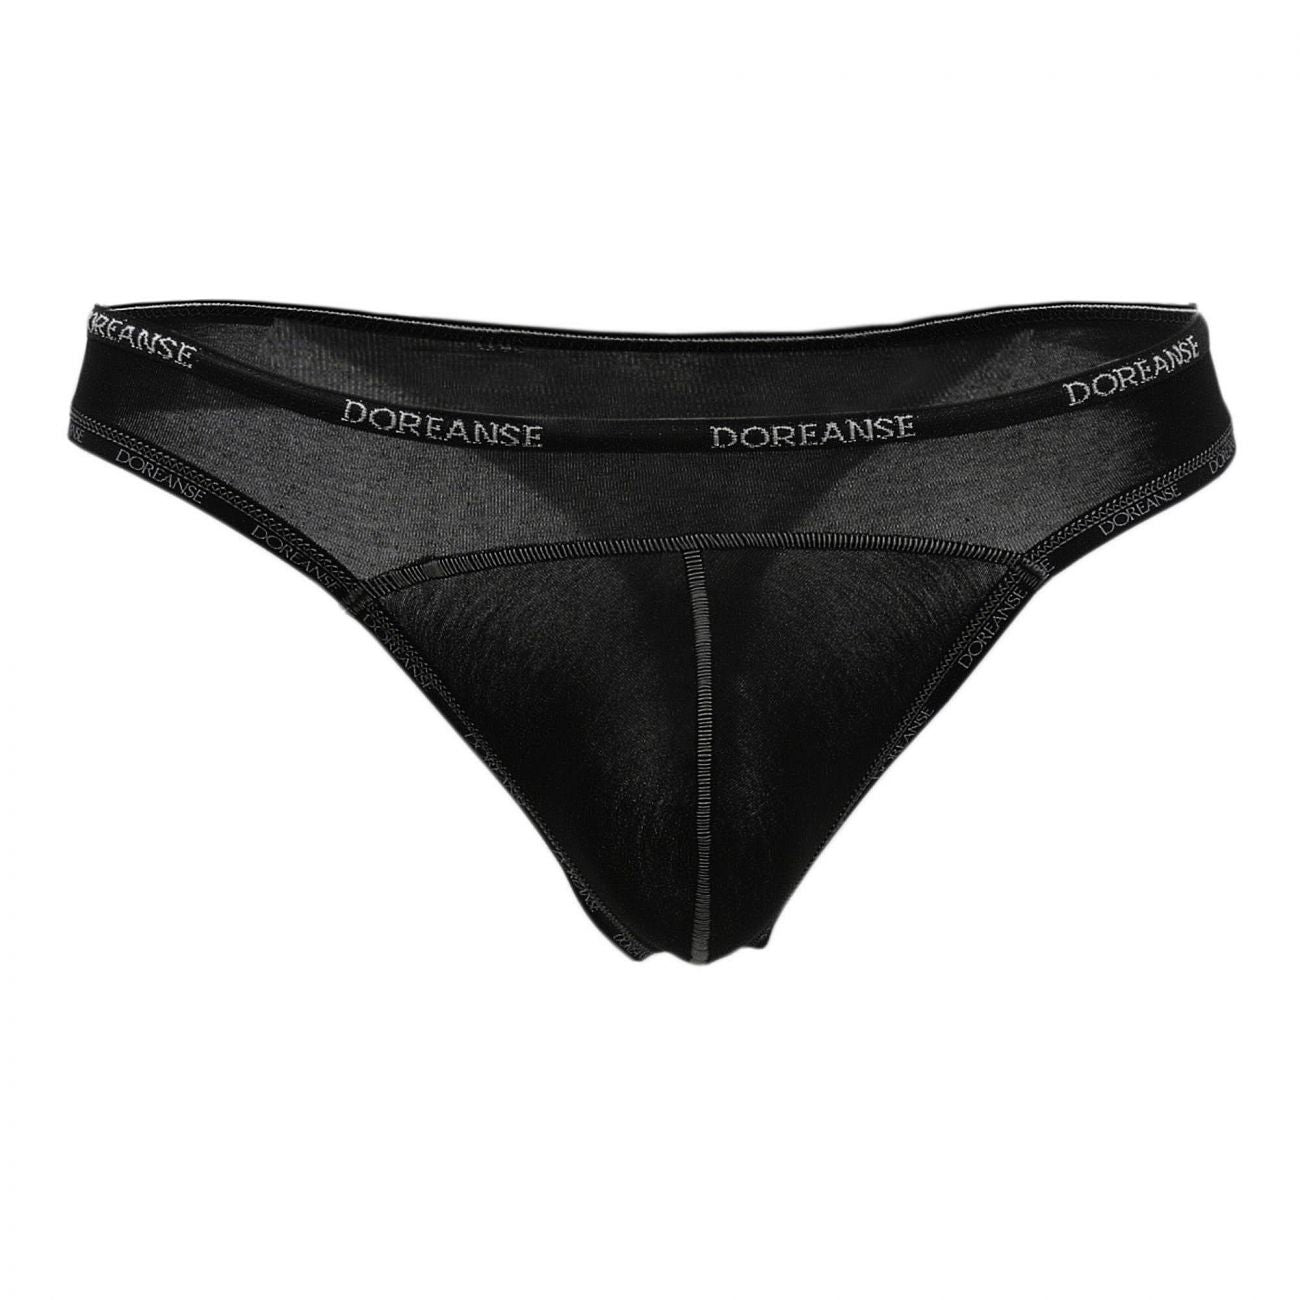 under-yours - Naked Thong - Doreanse - Mens Underwear